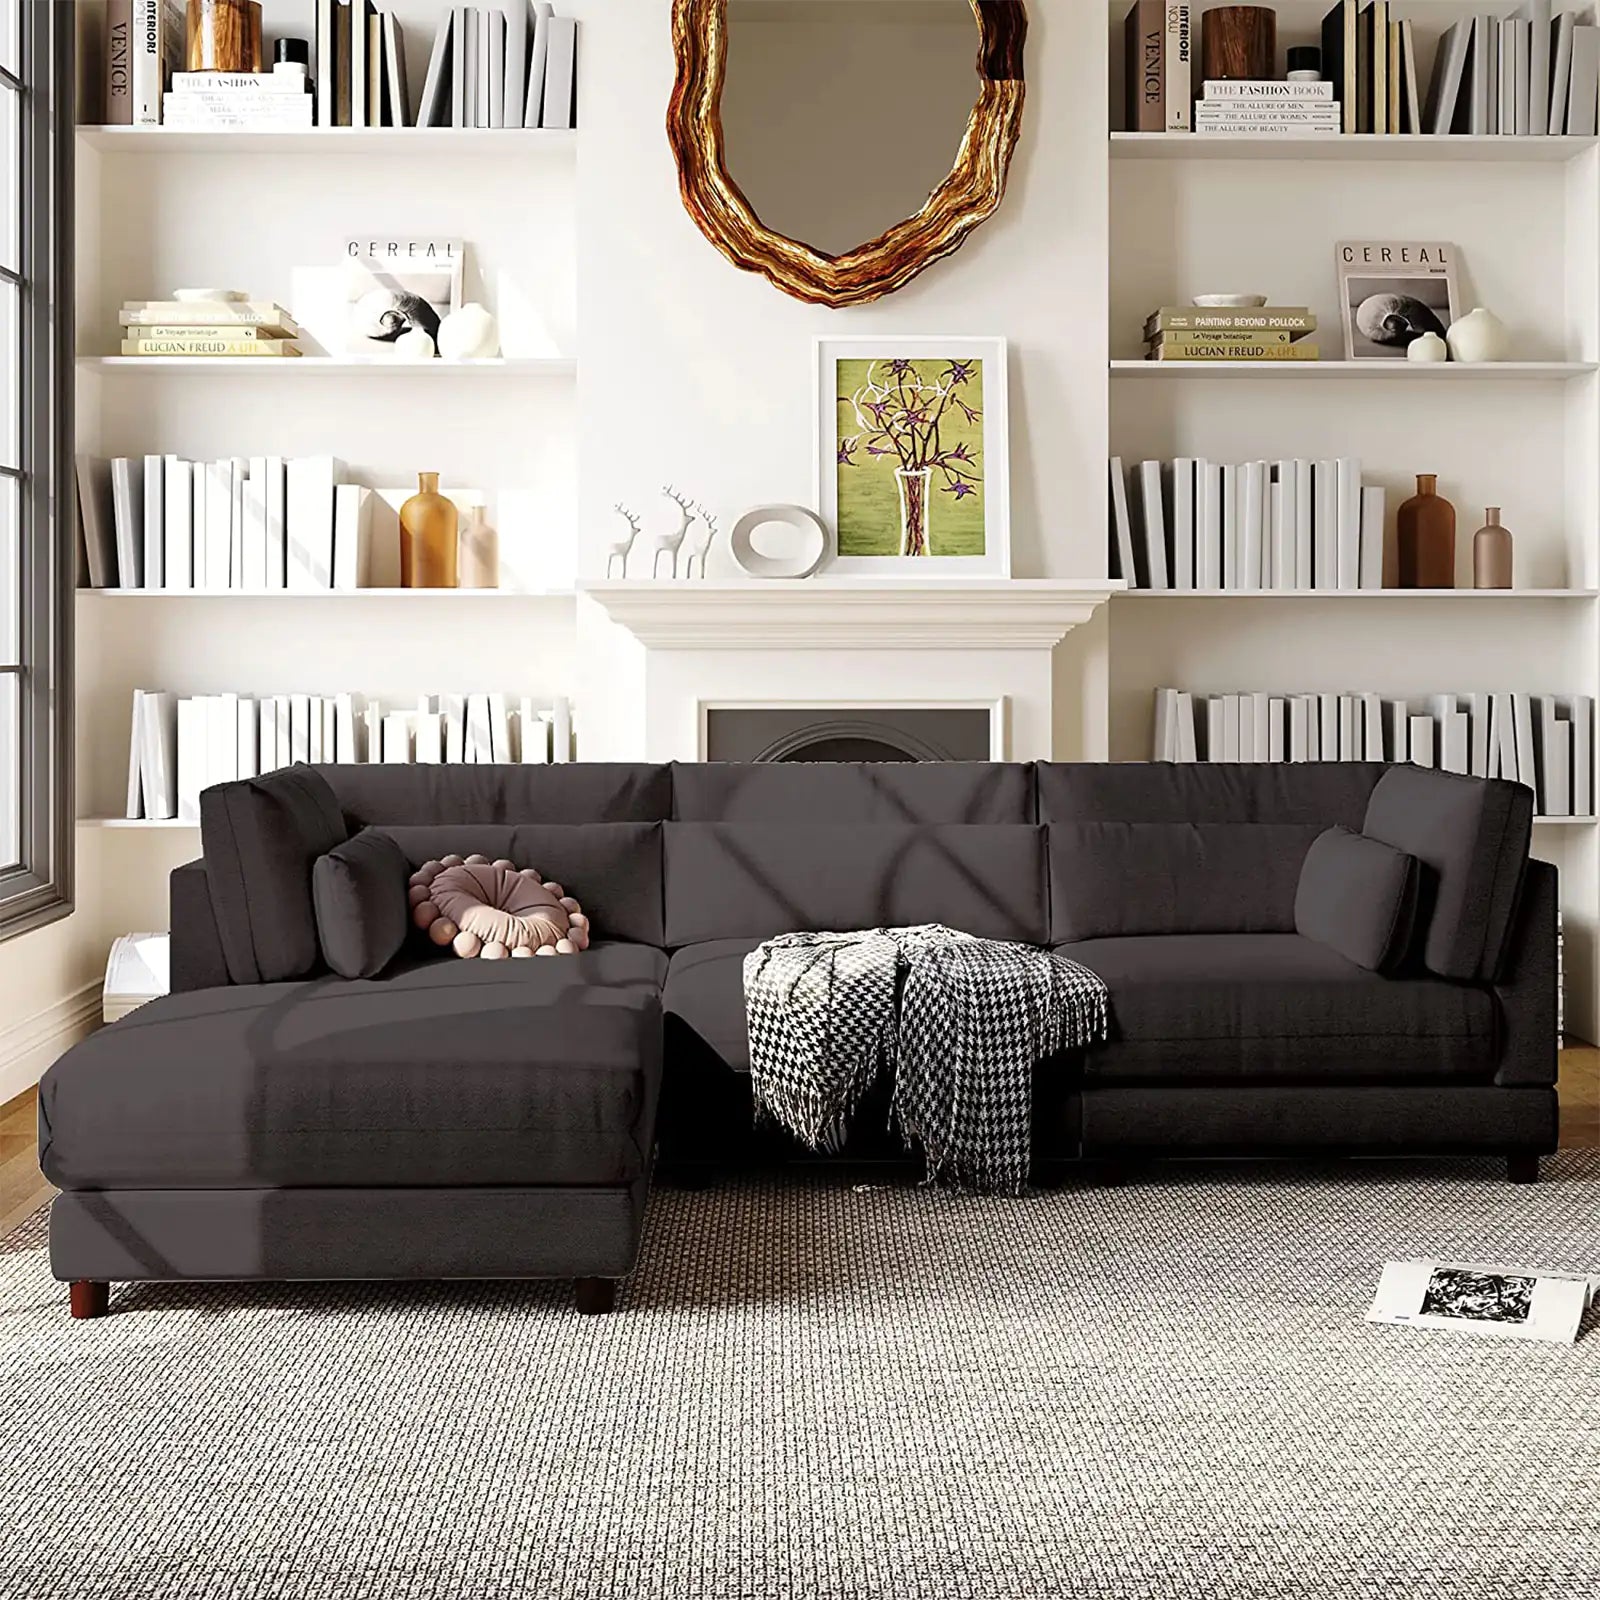 Upholstered Sectional Sofa Sets with Removable Ottomans and Waist Pillows